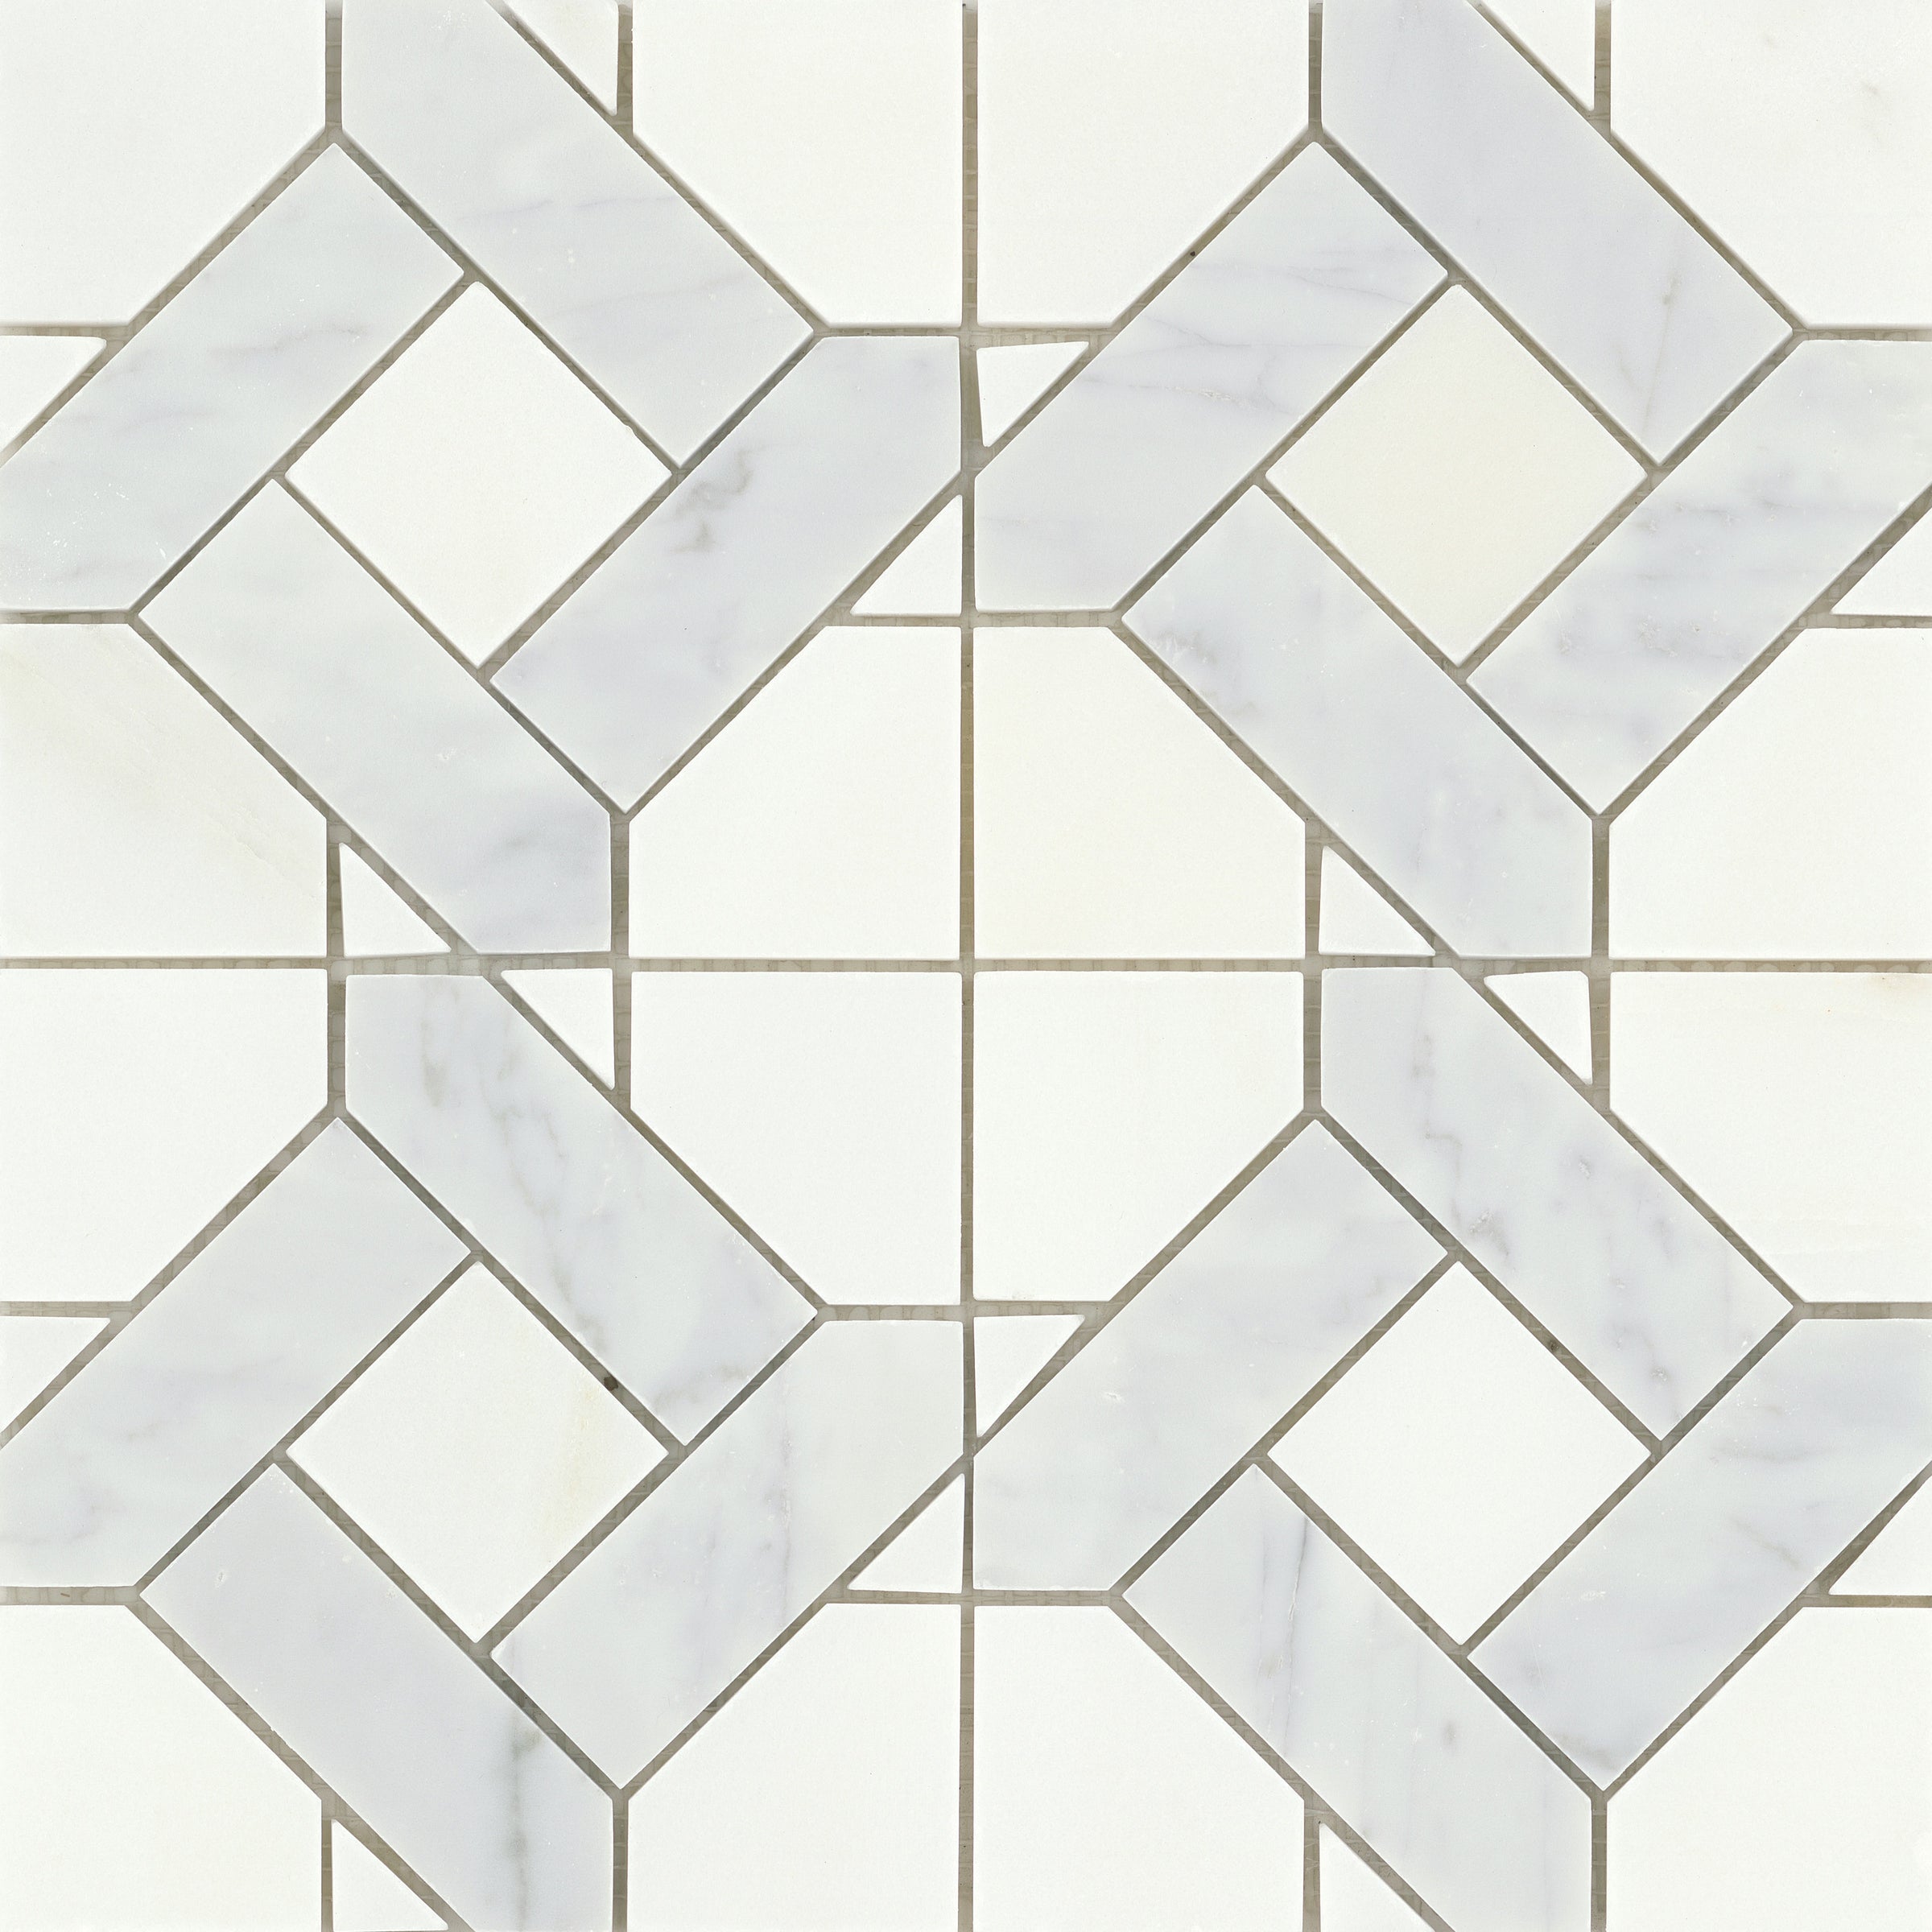 Emser ALLURO Manor Silver 12x12 stone mosaic tile M05ALLUSI1212MMA is an Emser Tile product. Emser Alluro Silver mosaic tile is composed of White Carrara marble and white marble. 